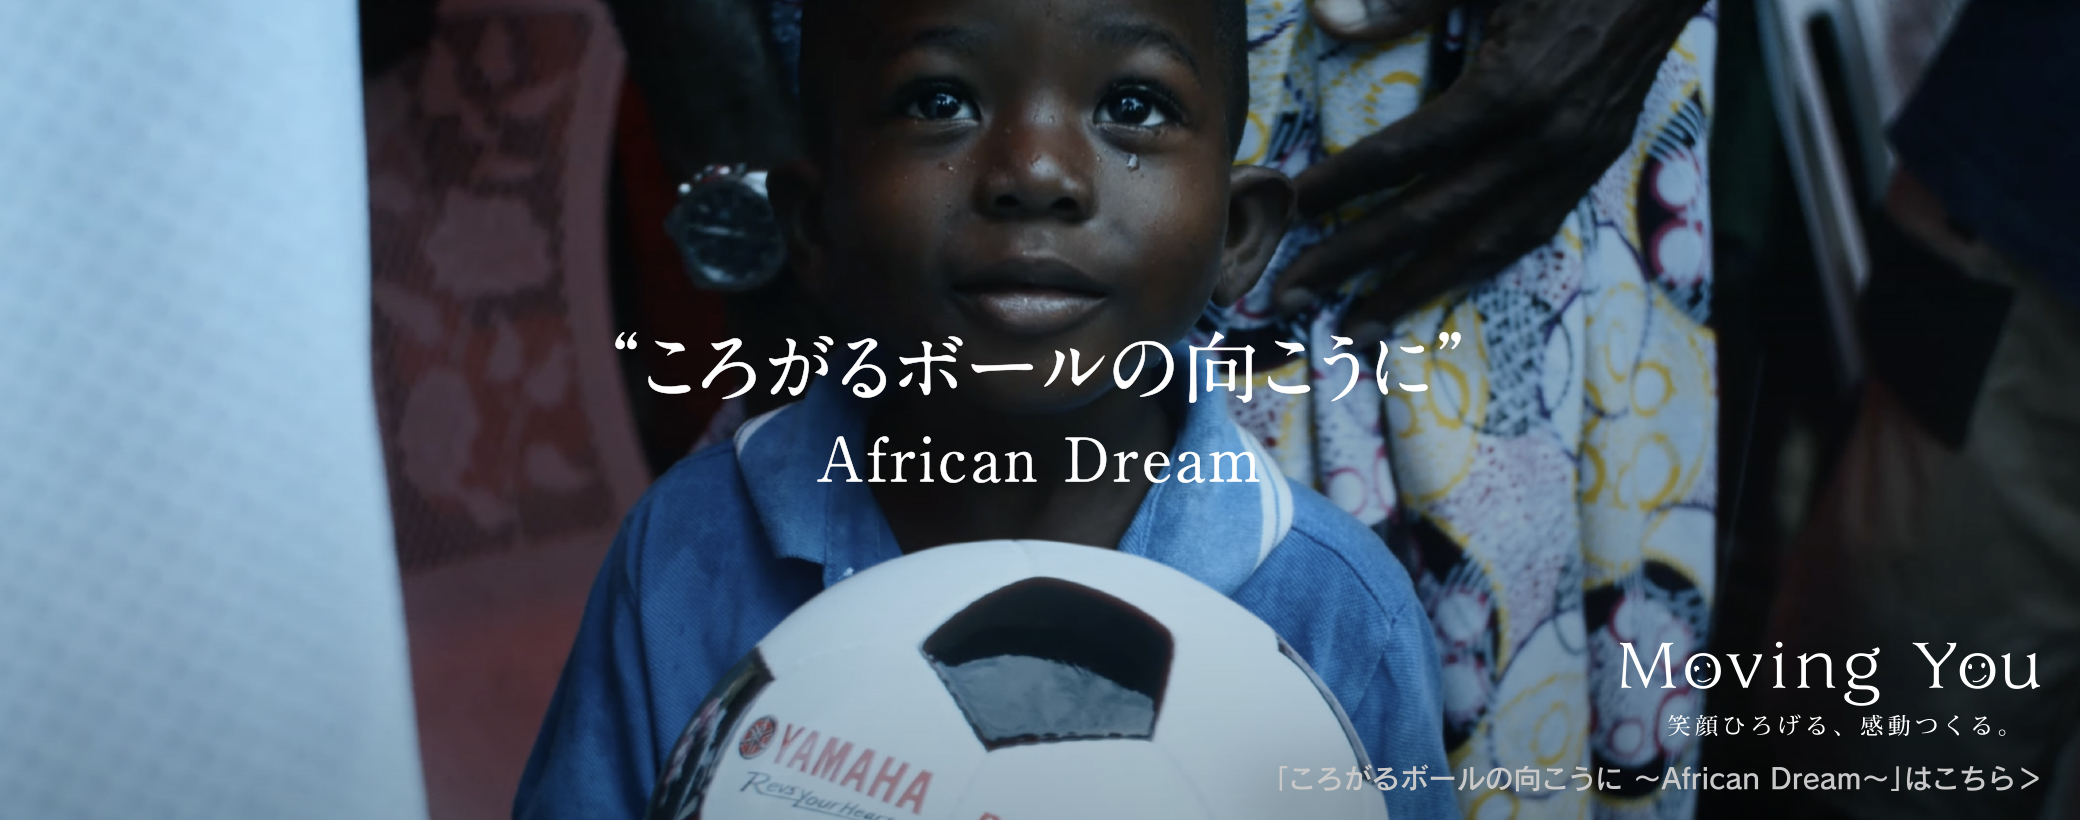 Moving You 〜African Dream〜